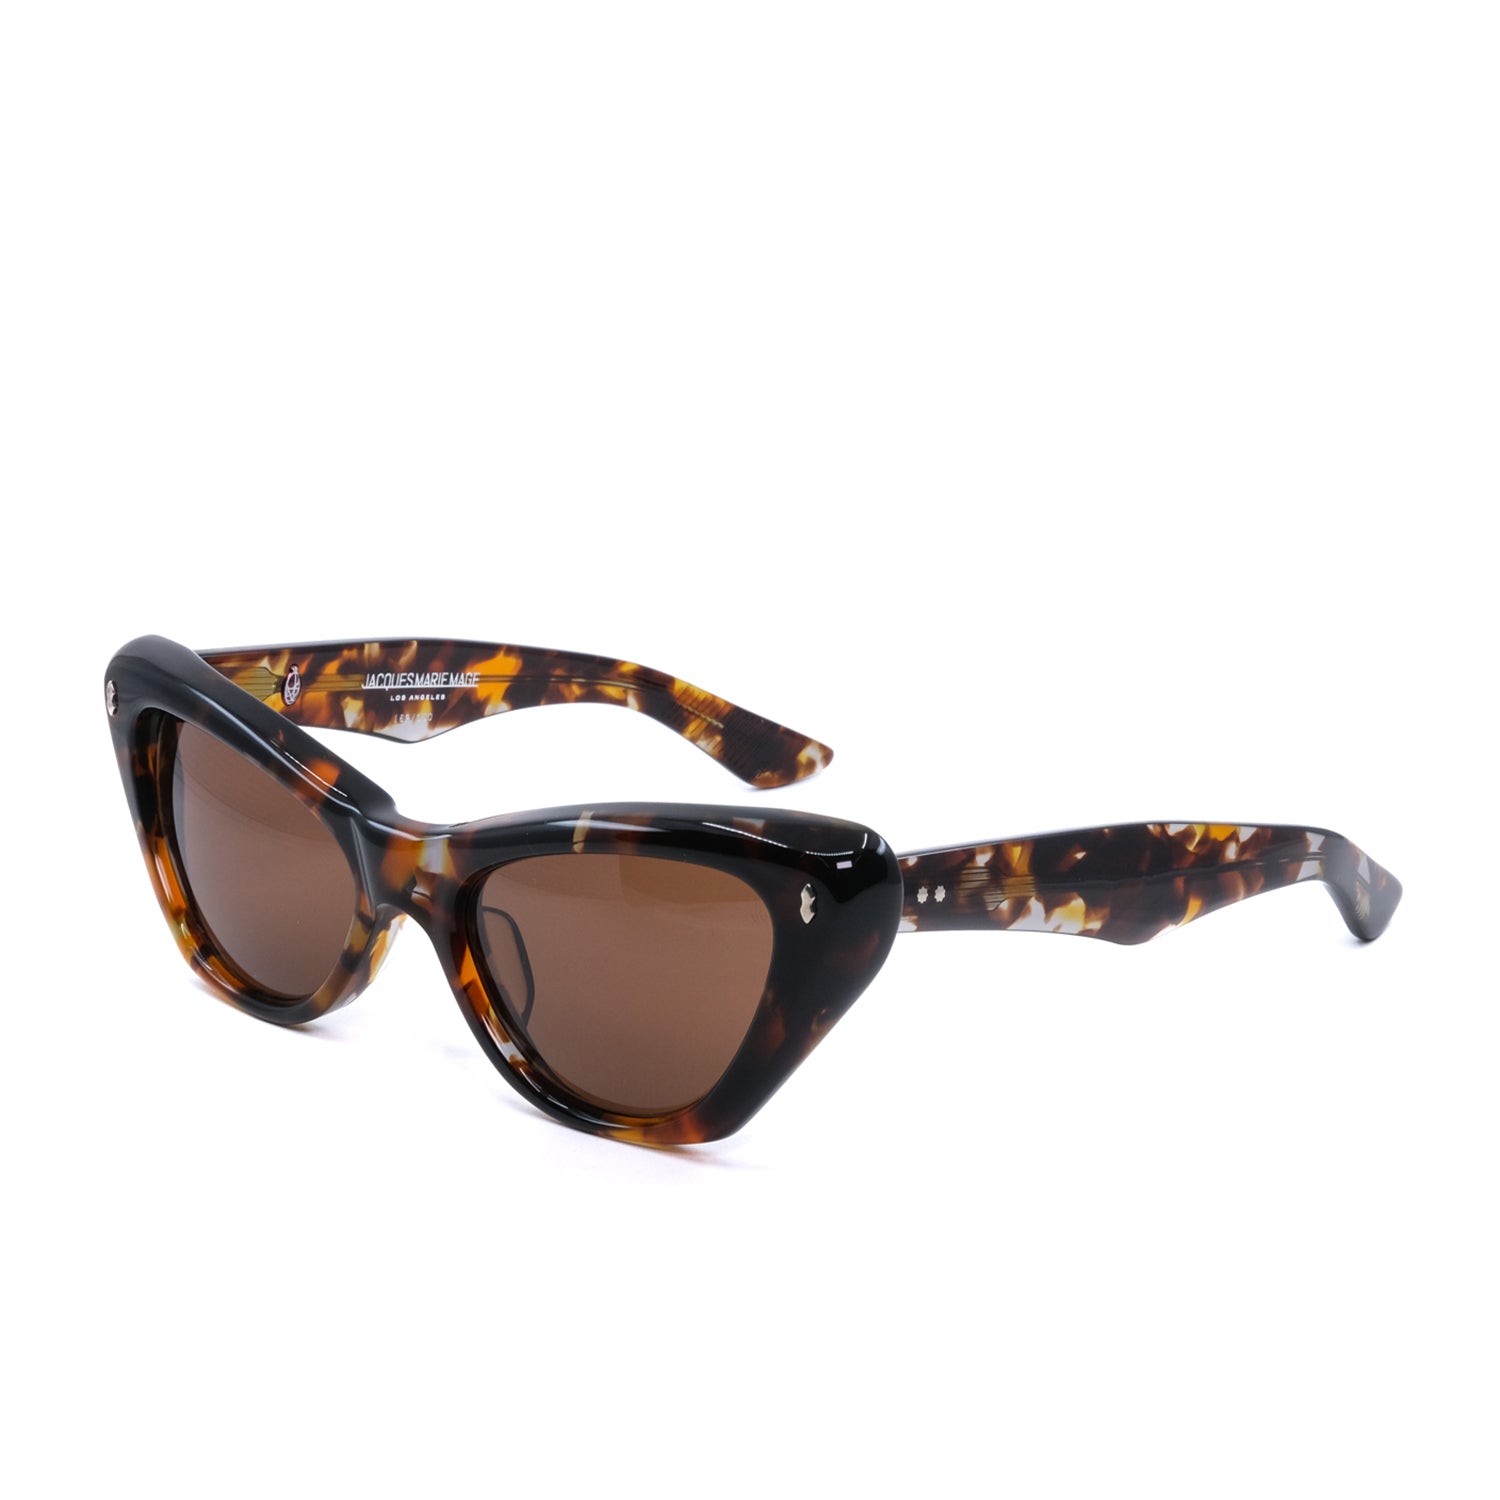 JACQUES MARIE MAGE KELLY DESIGNER SUNGLASS